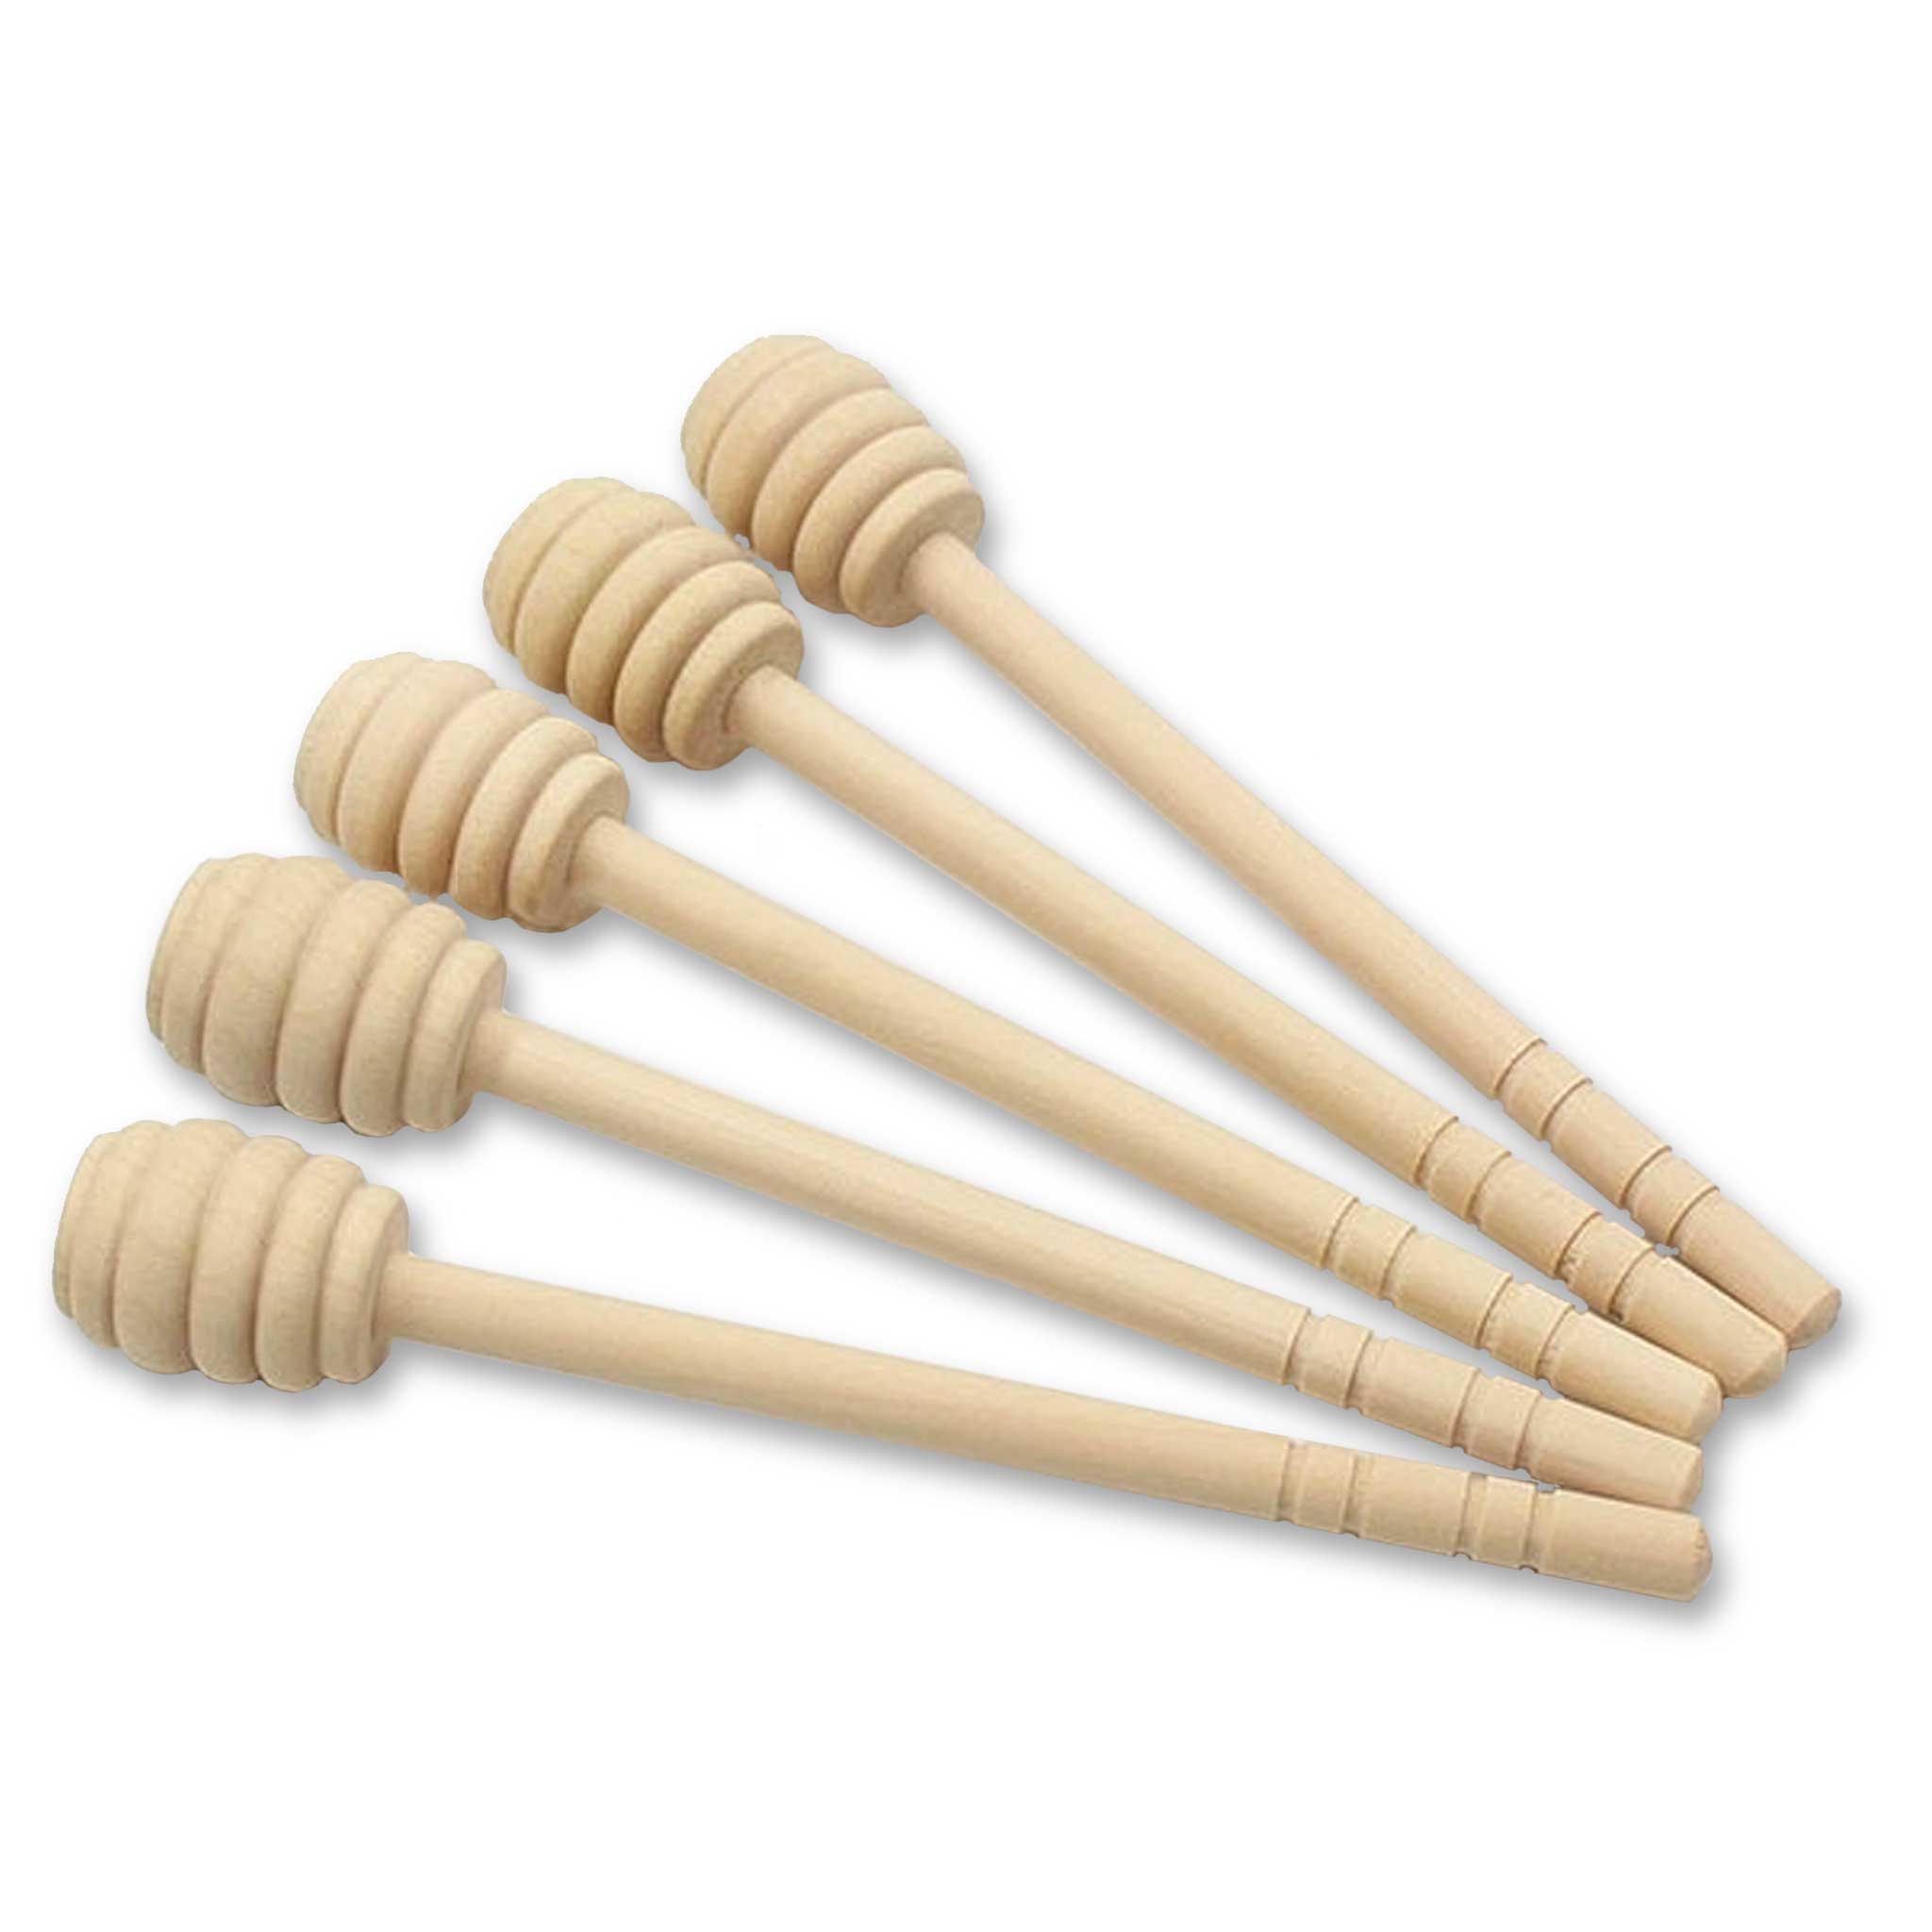 Dipping Sticks for Honey (5 Pack) - Processing collection by Buzzbee Beekeeping Supplies